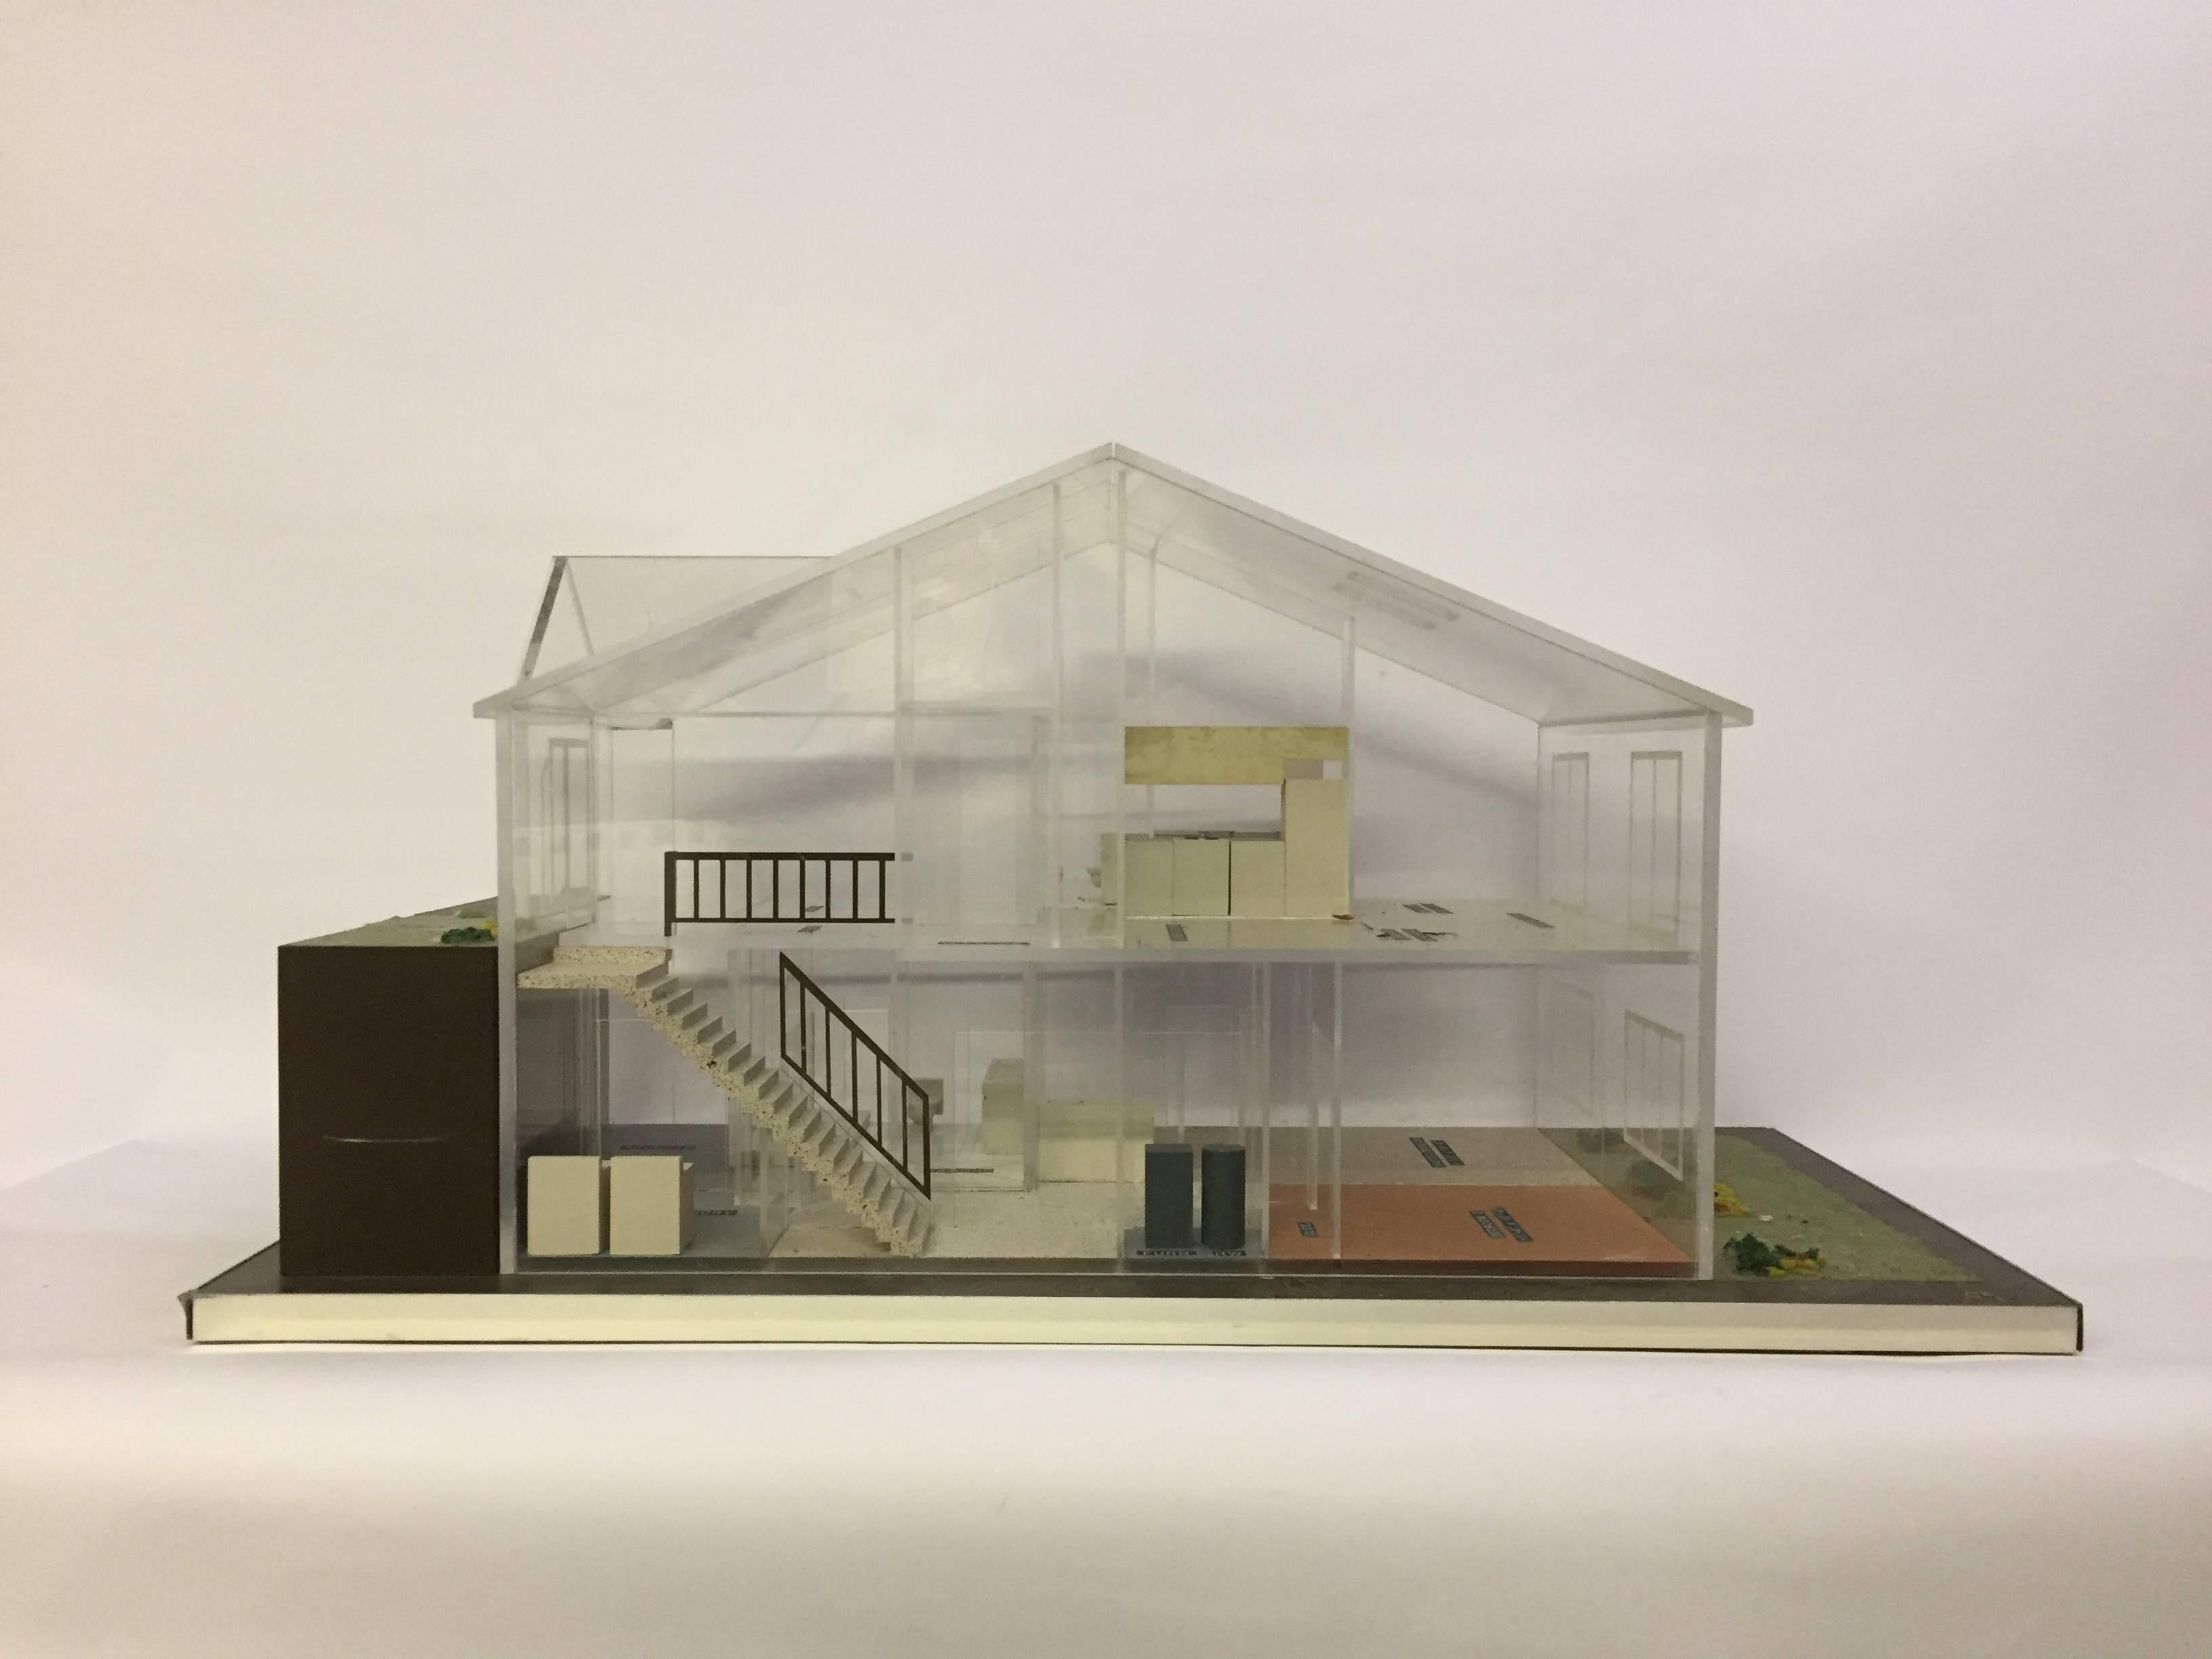 Wonderful architectural model rendering for a client's home, circa 1970. The house was never built, but the model remains. Made of clear Lucite/acrylic and with some furnishings. Cabinetry included in the bathroom, kitchen and laundry room. Each